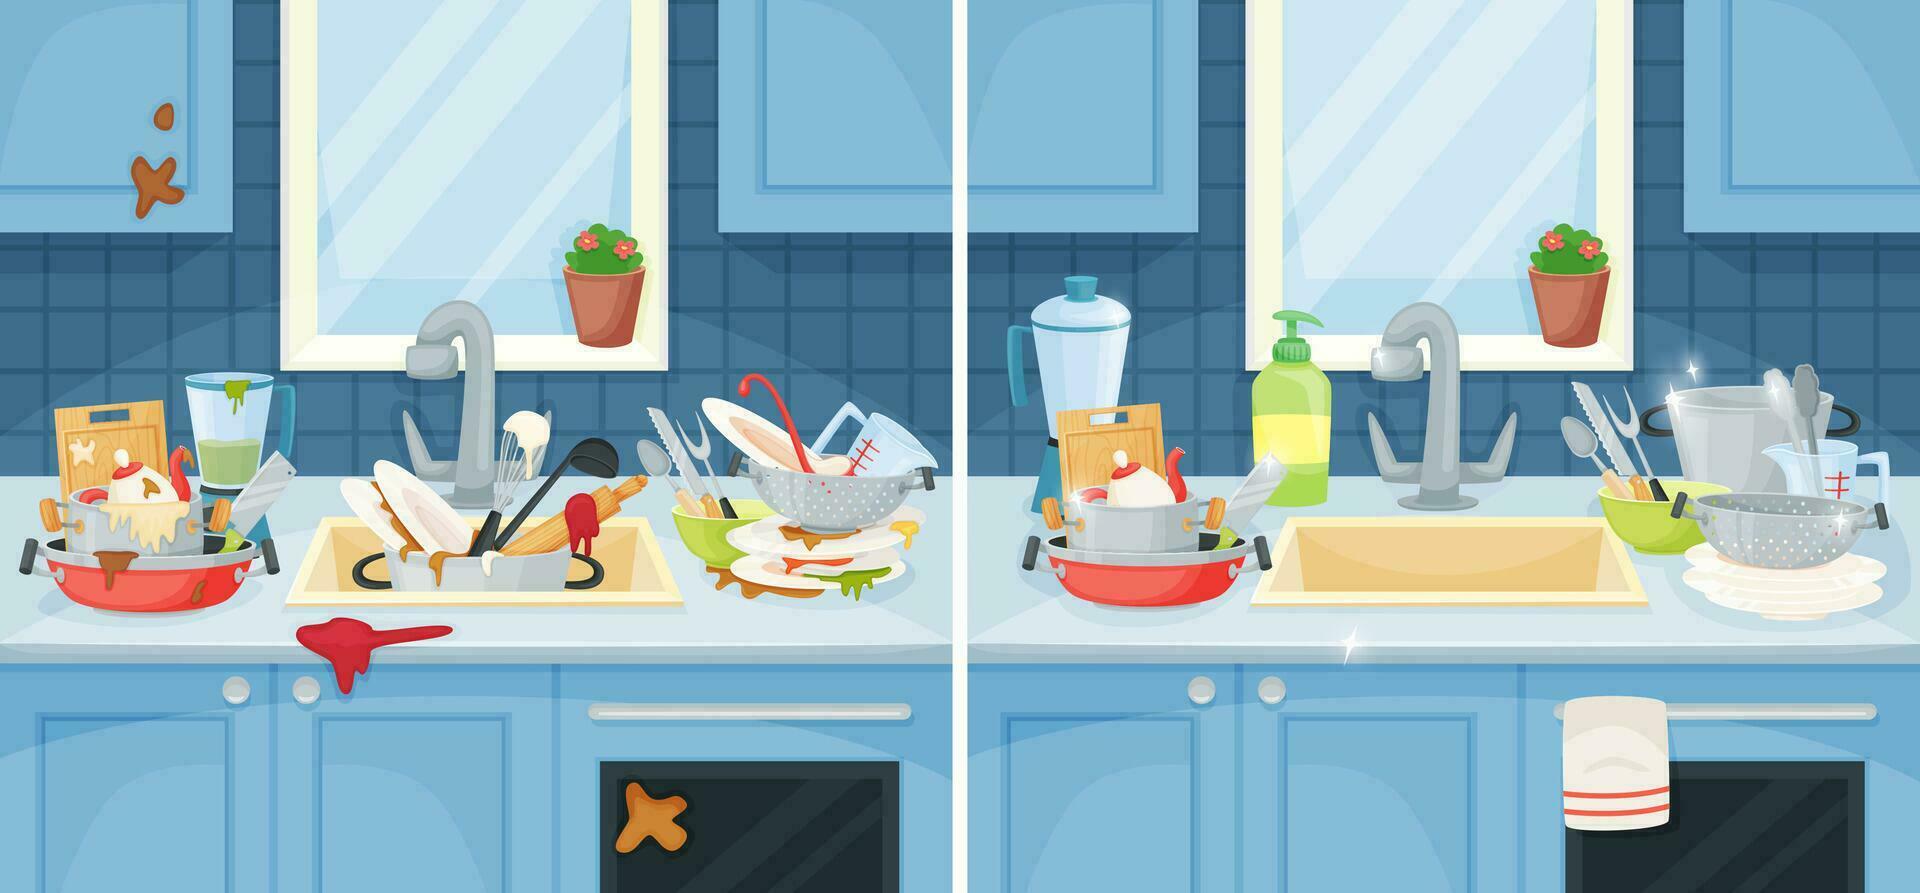 Dirty and clean dishes in sink, messy plates and cups. Cartoon unwashed kitchenware, before and after cleaning kitchen vector illustration